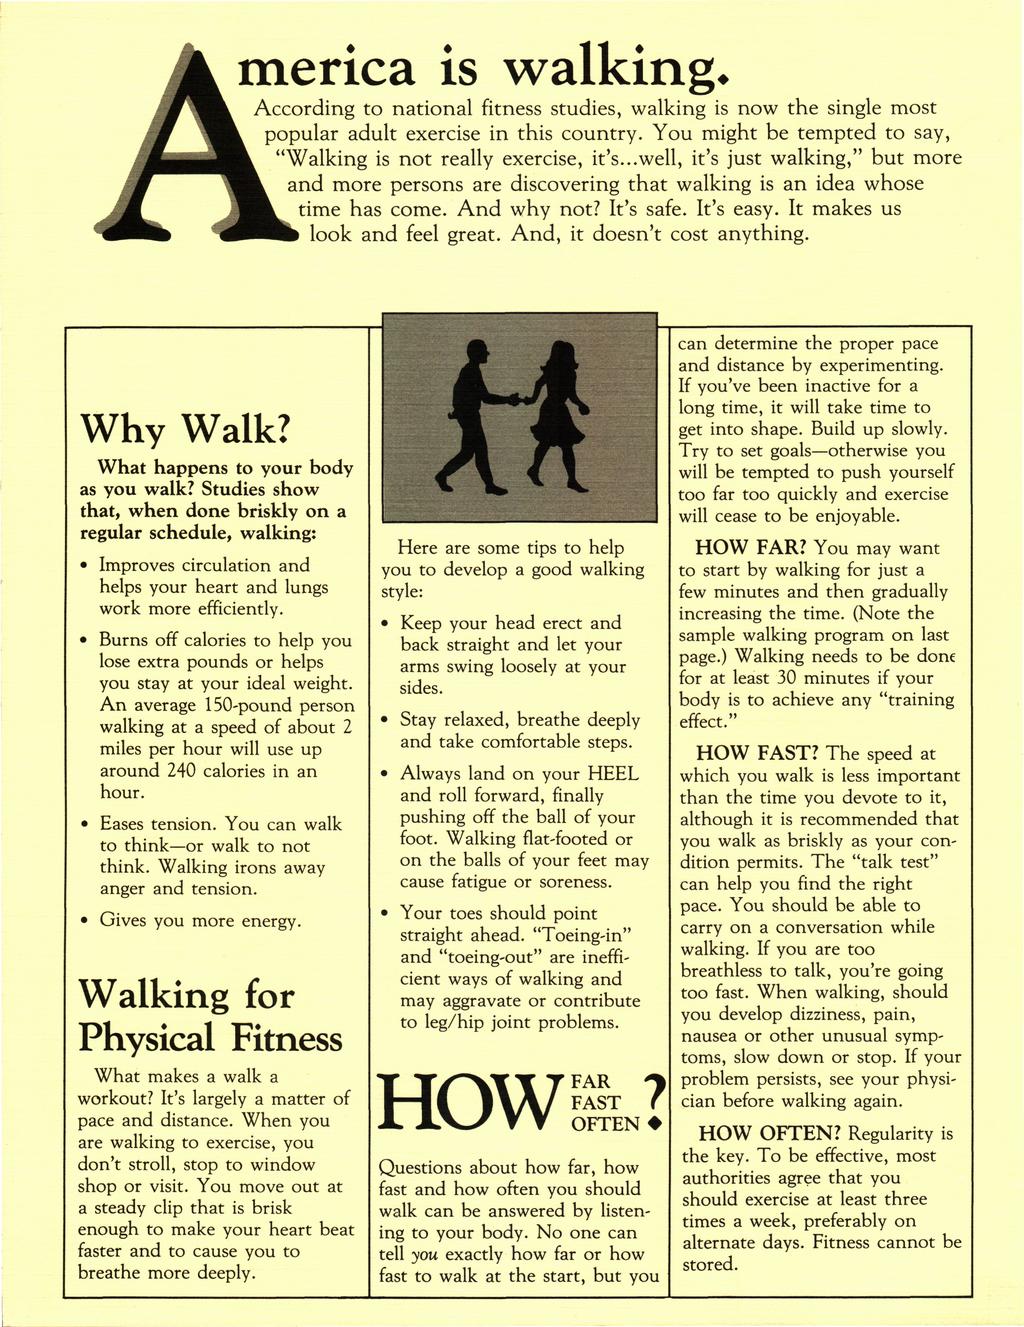 merica is walking* According to national fitness studies, walking is now the single most popular adult exercise in this country. You might be tempted to say, "Walking is not really exercise, it's.